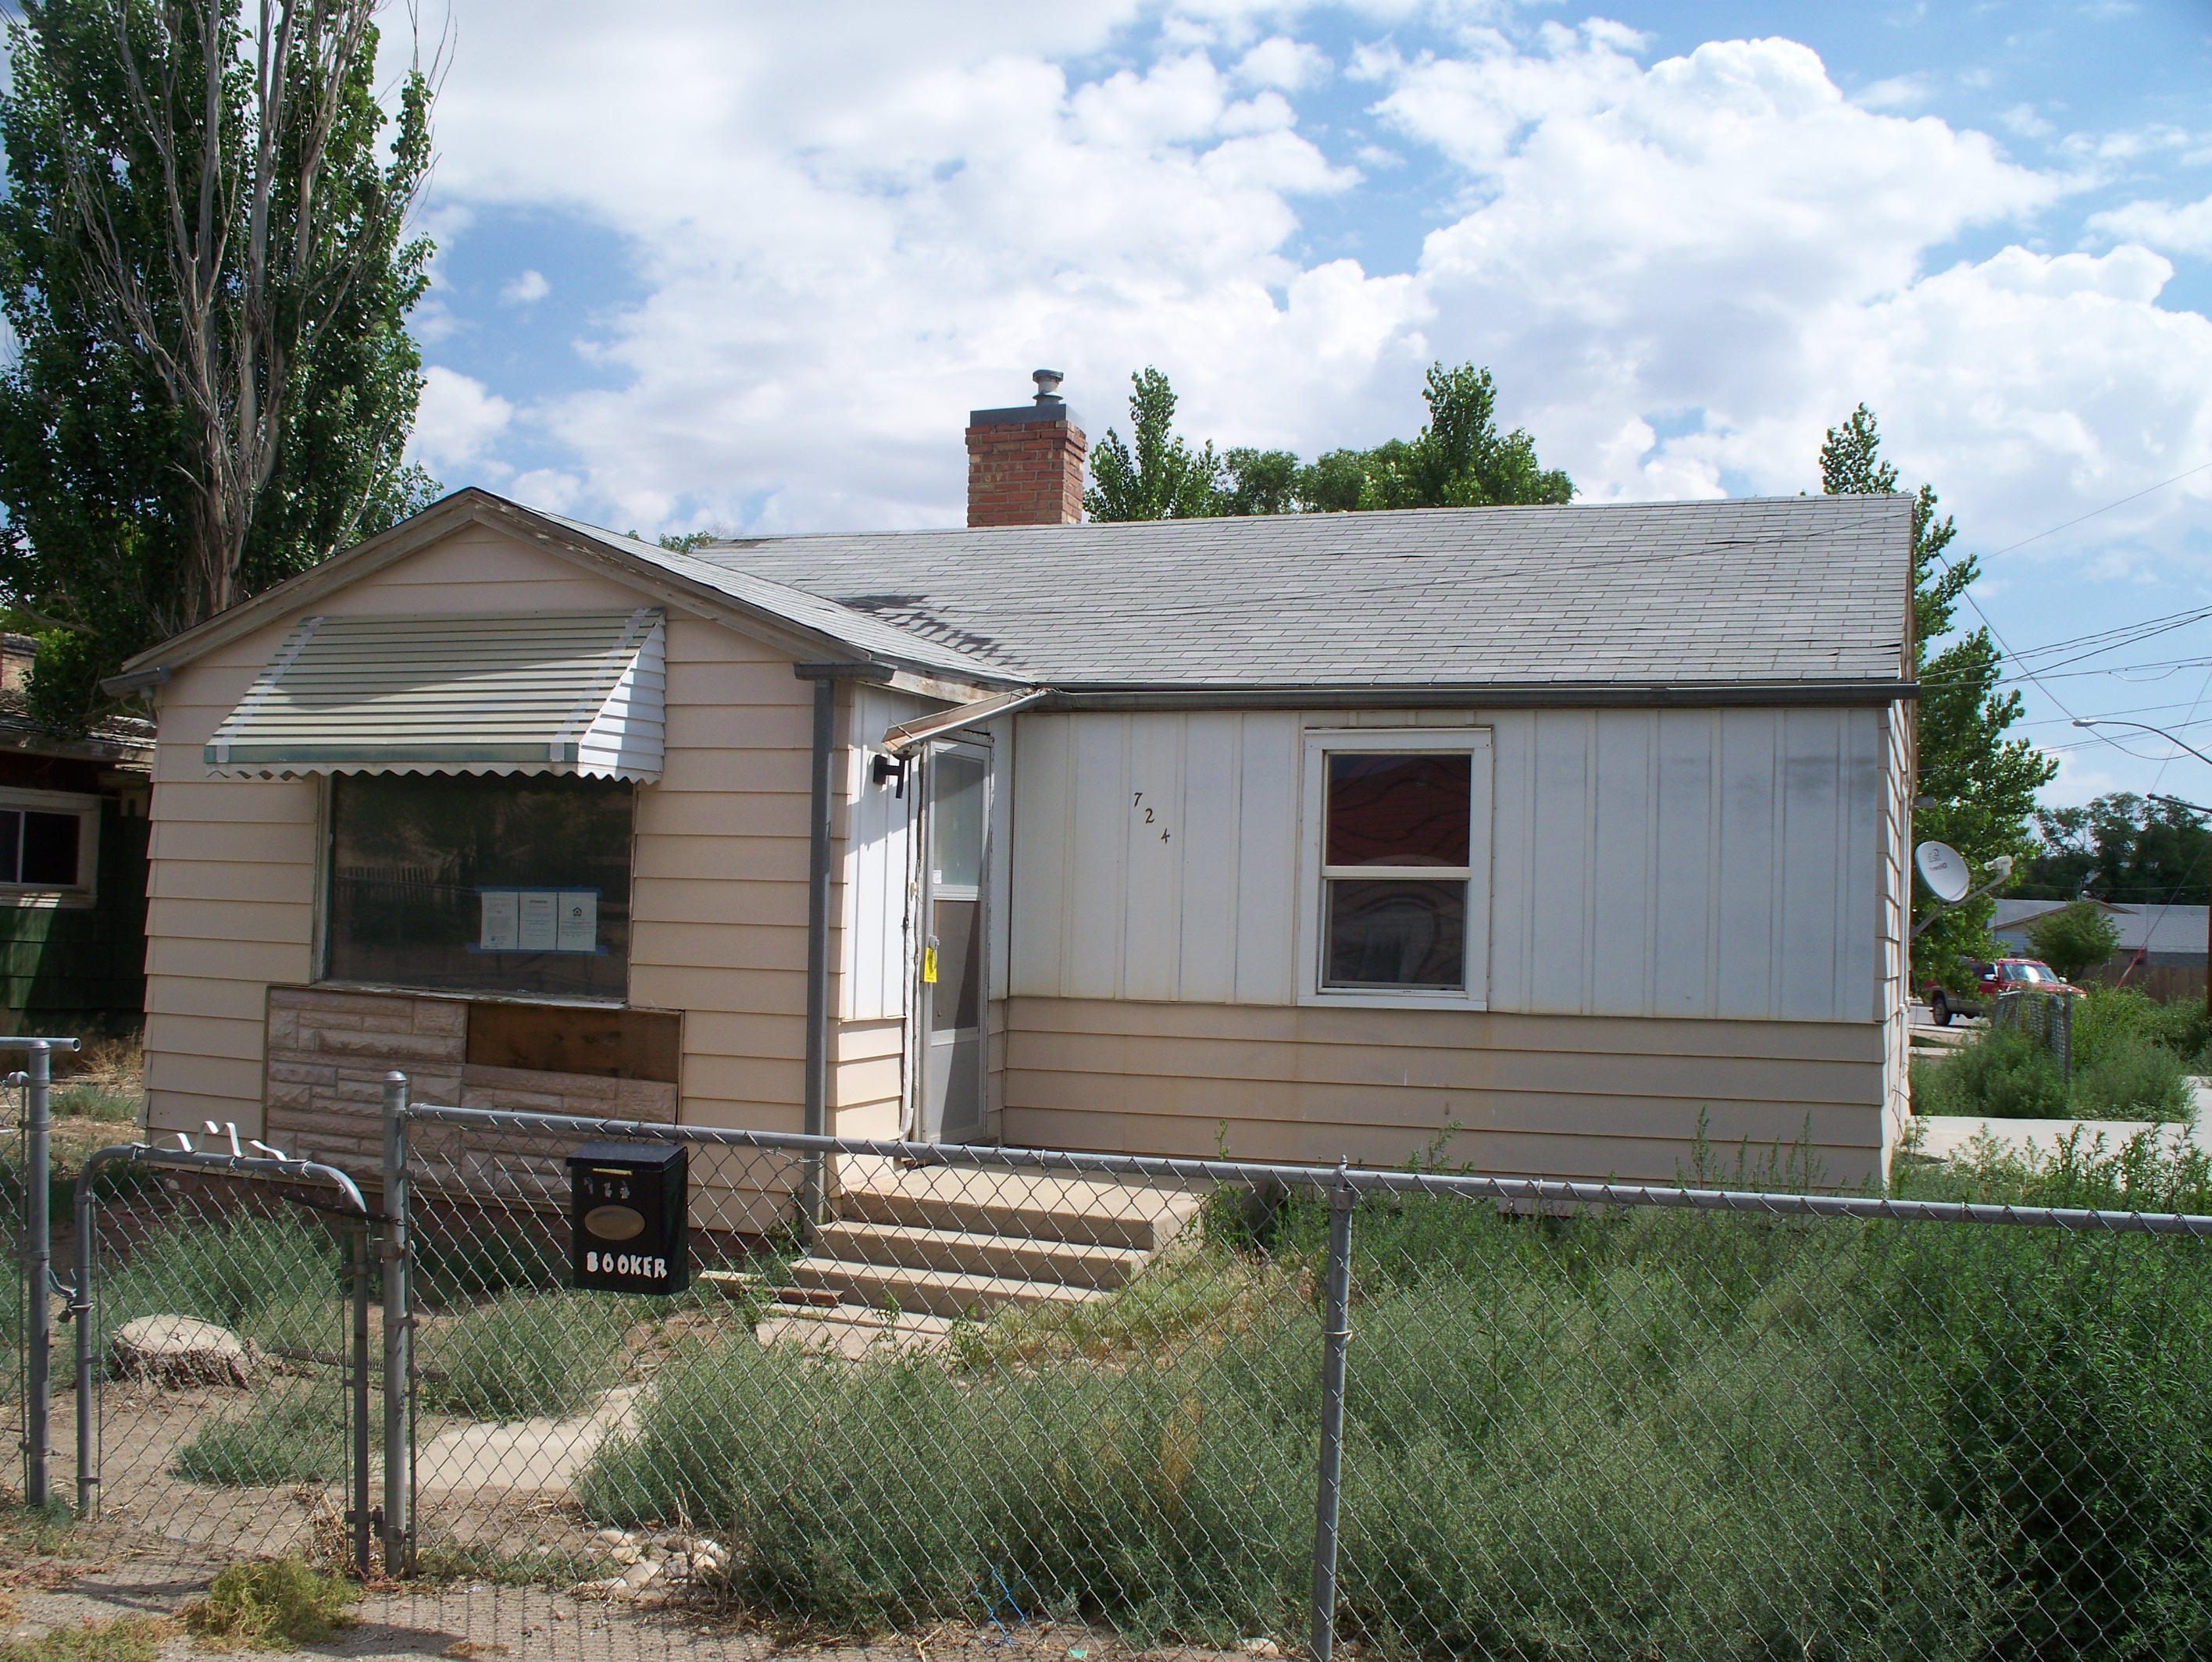 724 Booker St, Rock Springs, WY Main Image